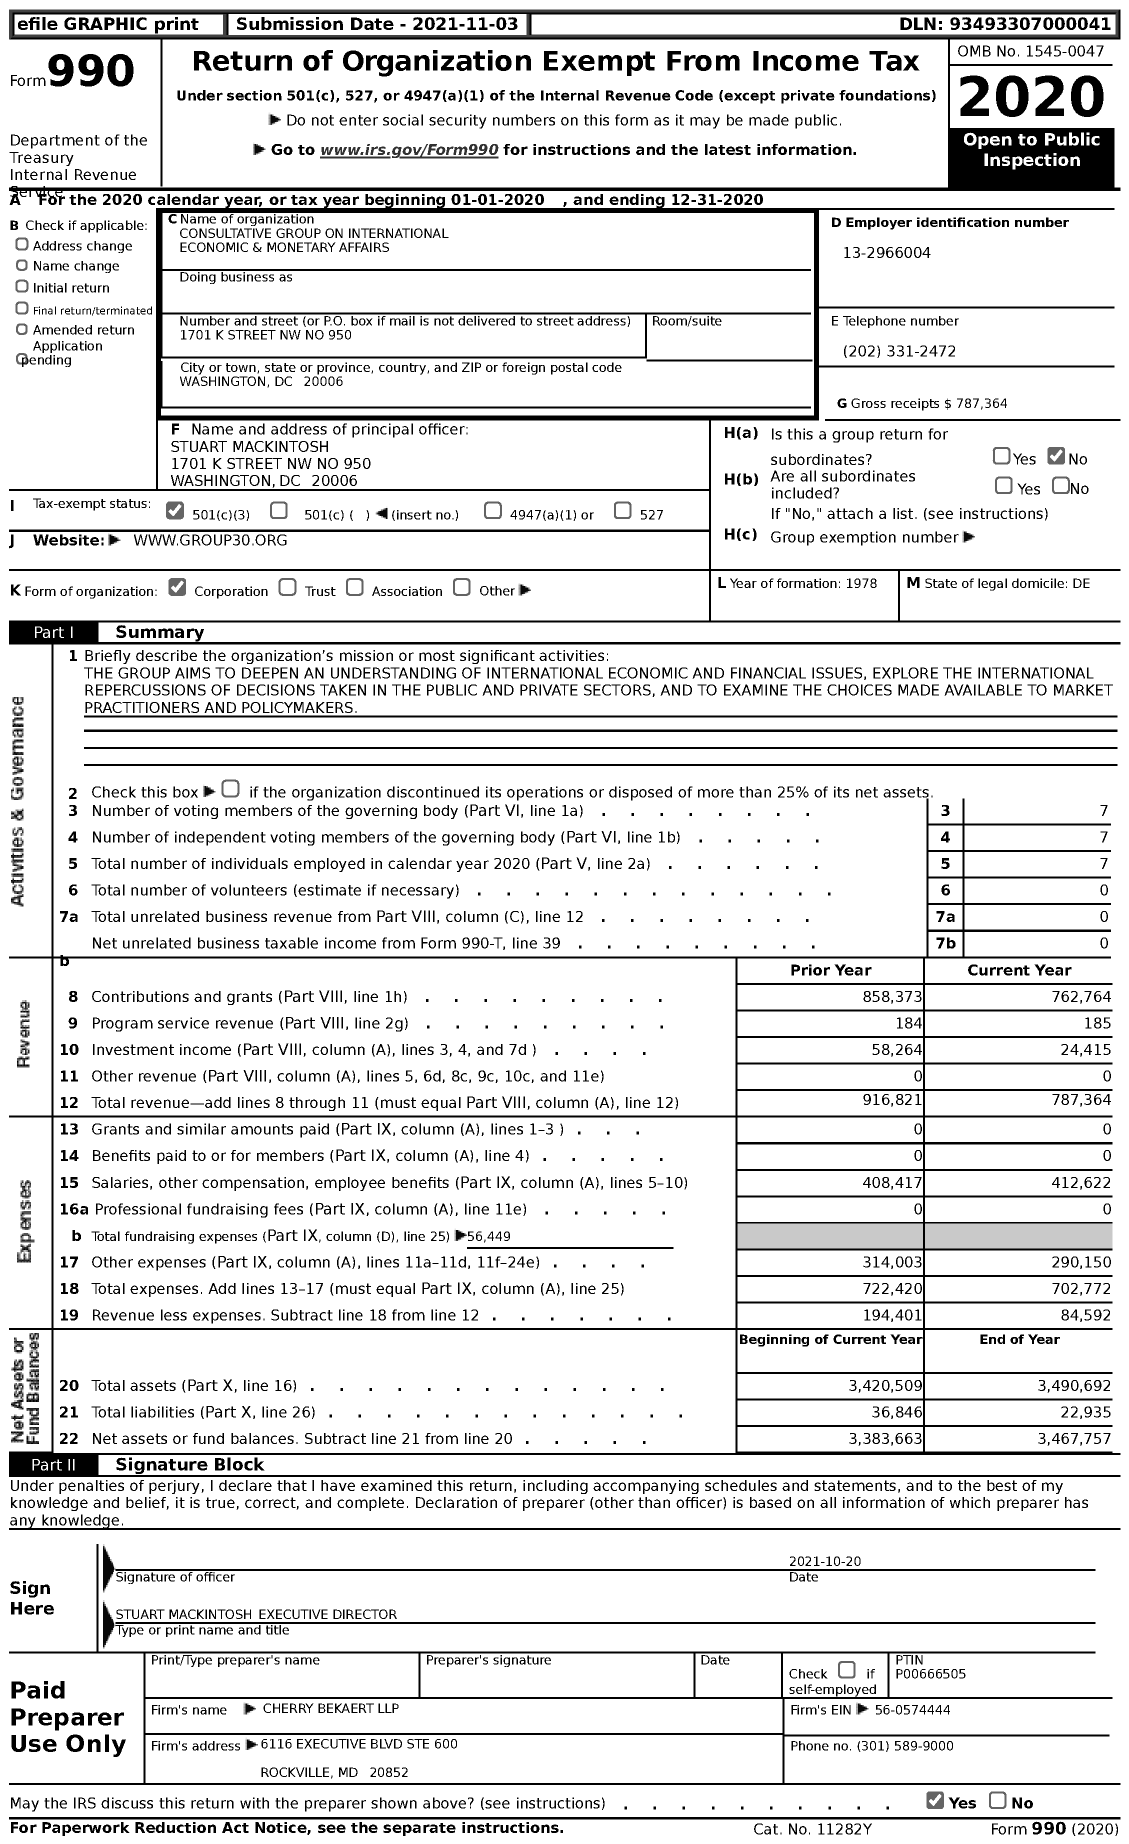 Image of first page of 2020 Form 990 for Consultative Group on International Economic and Monetary Affairs